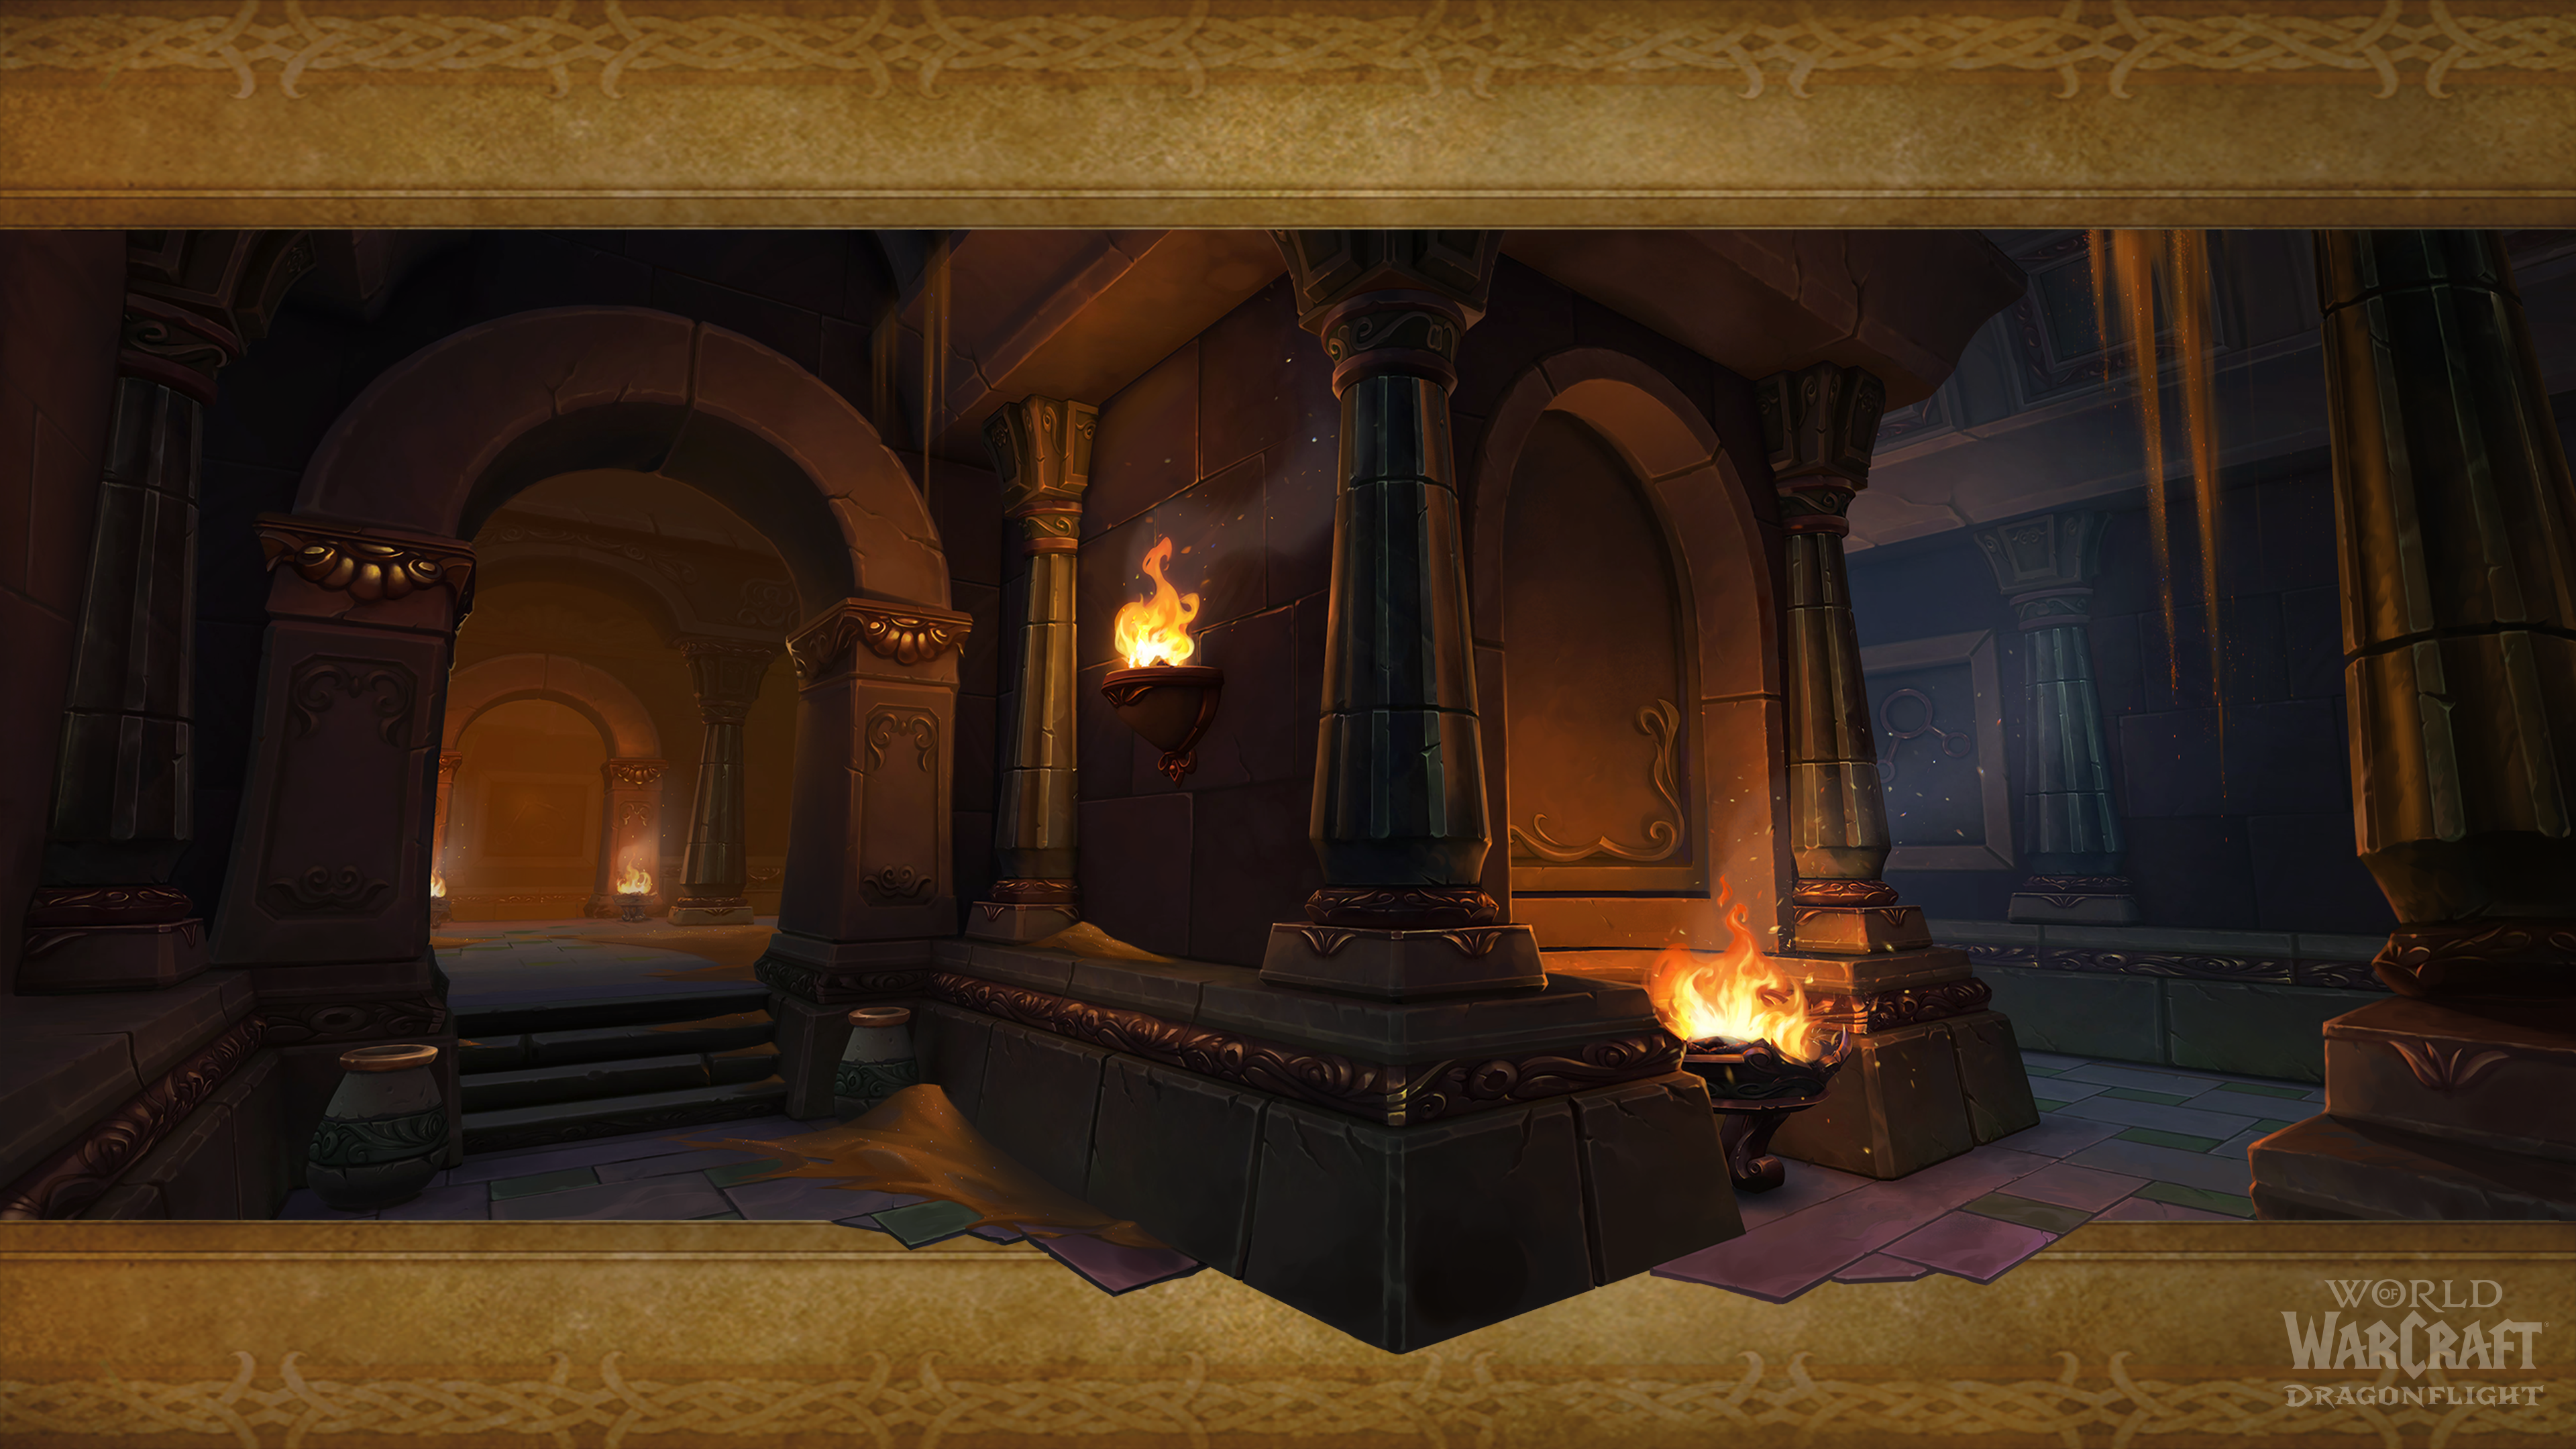 World Of Warcraft Dragonflight Video Games Video Game Art Temple Interior Fire 3840x2160